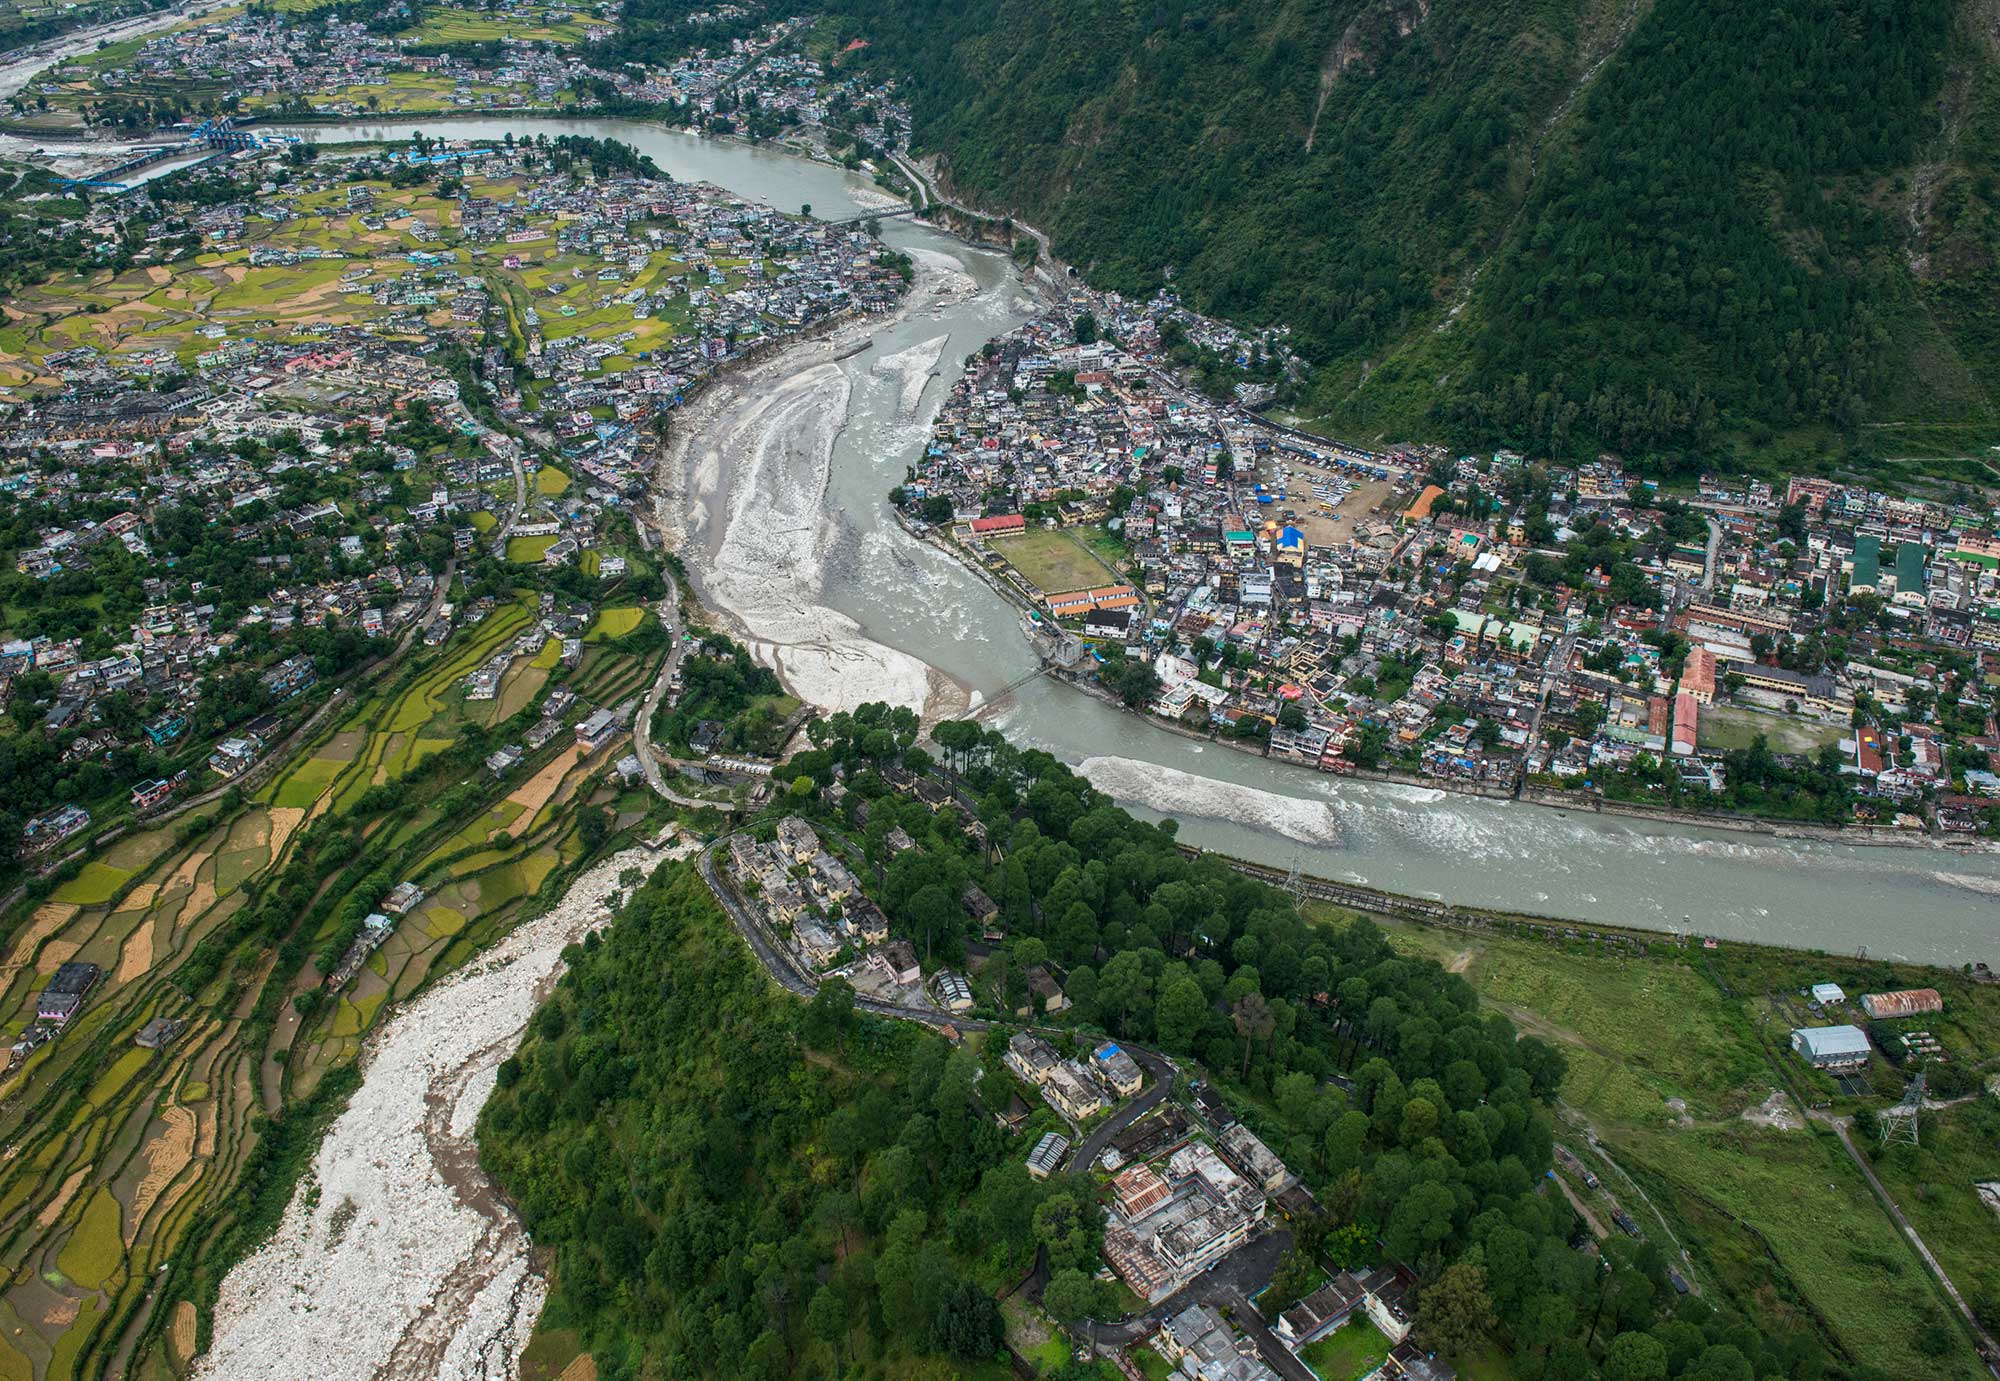 Aerial Image of the Ganges as it winds through the Uttarkashi region in the foothills of the Himalaya. In 2013, a record flood devastated this region, wiping roads and villages off the map, killing 6000 and leaving 30,000 stranded.